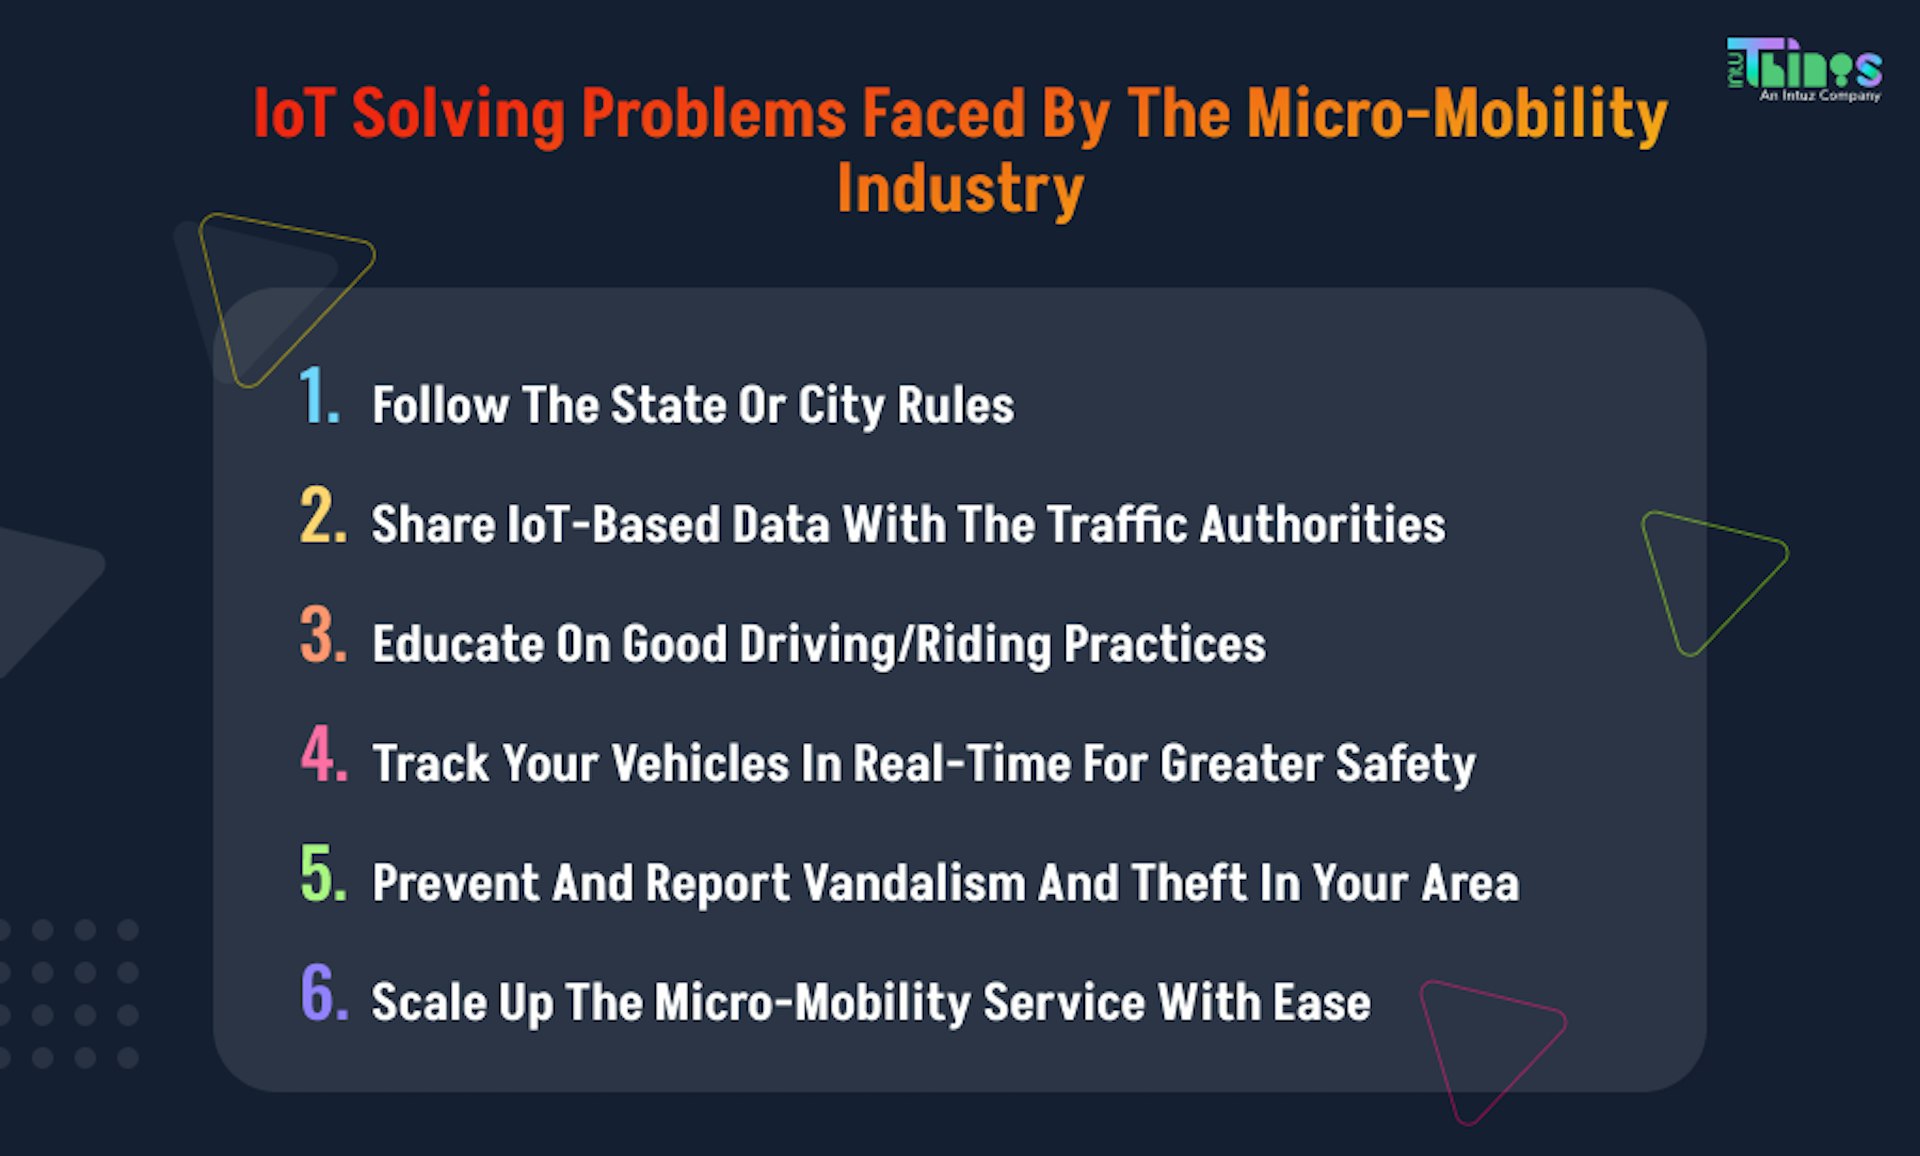 IoT solving problems of micro-mobility industry